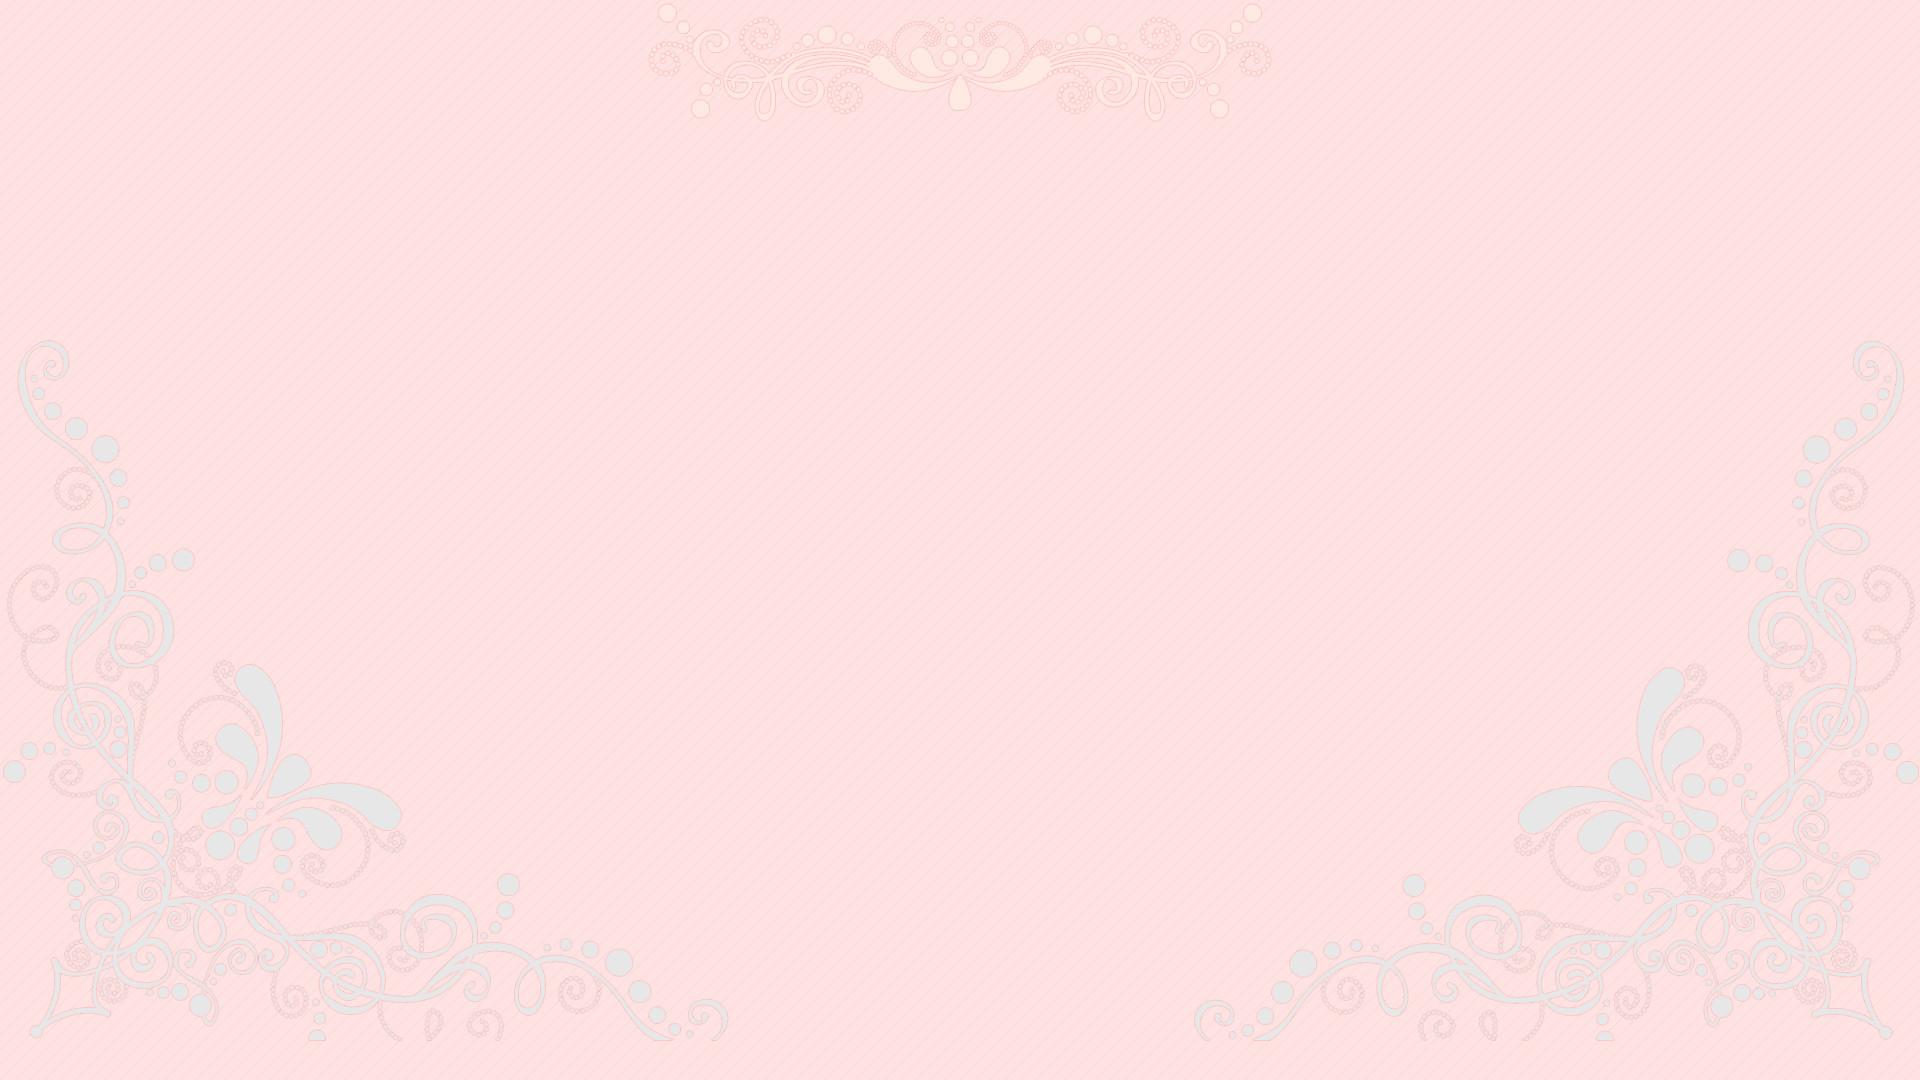 Light pink background with a white and light blue pattern on the edges - Coquette